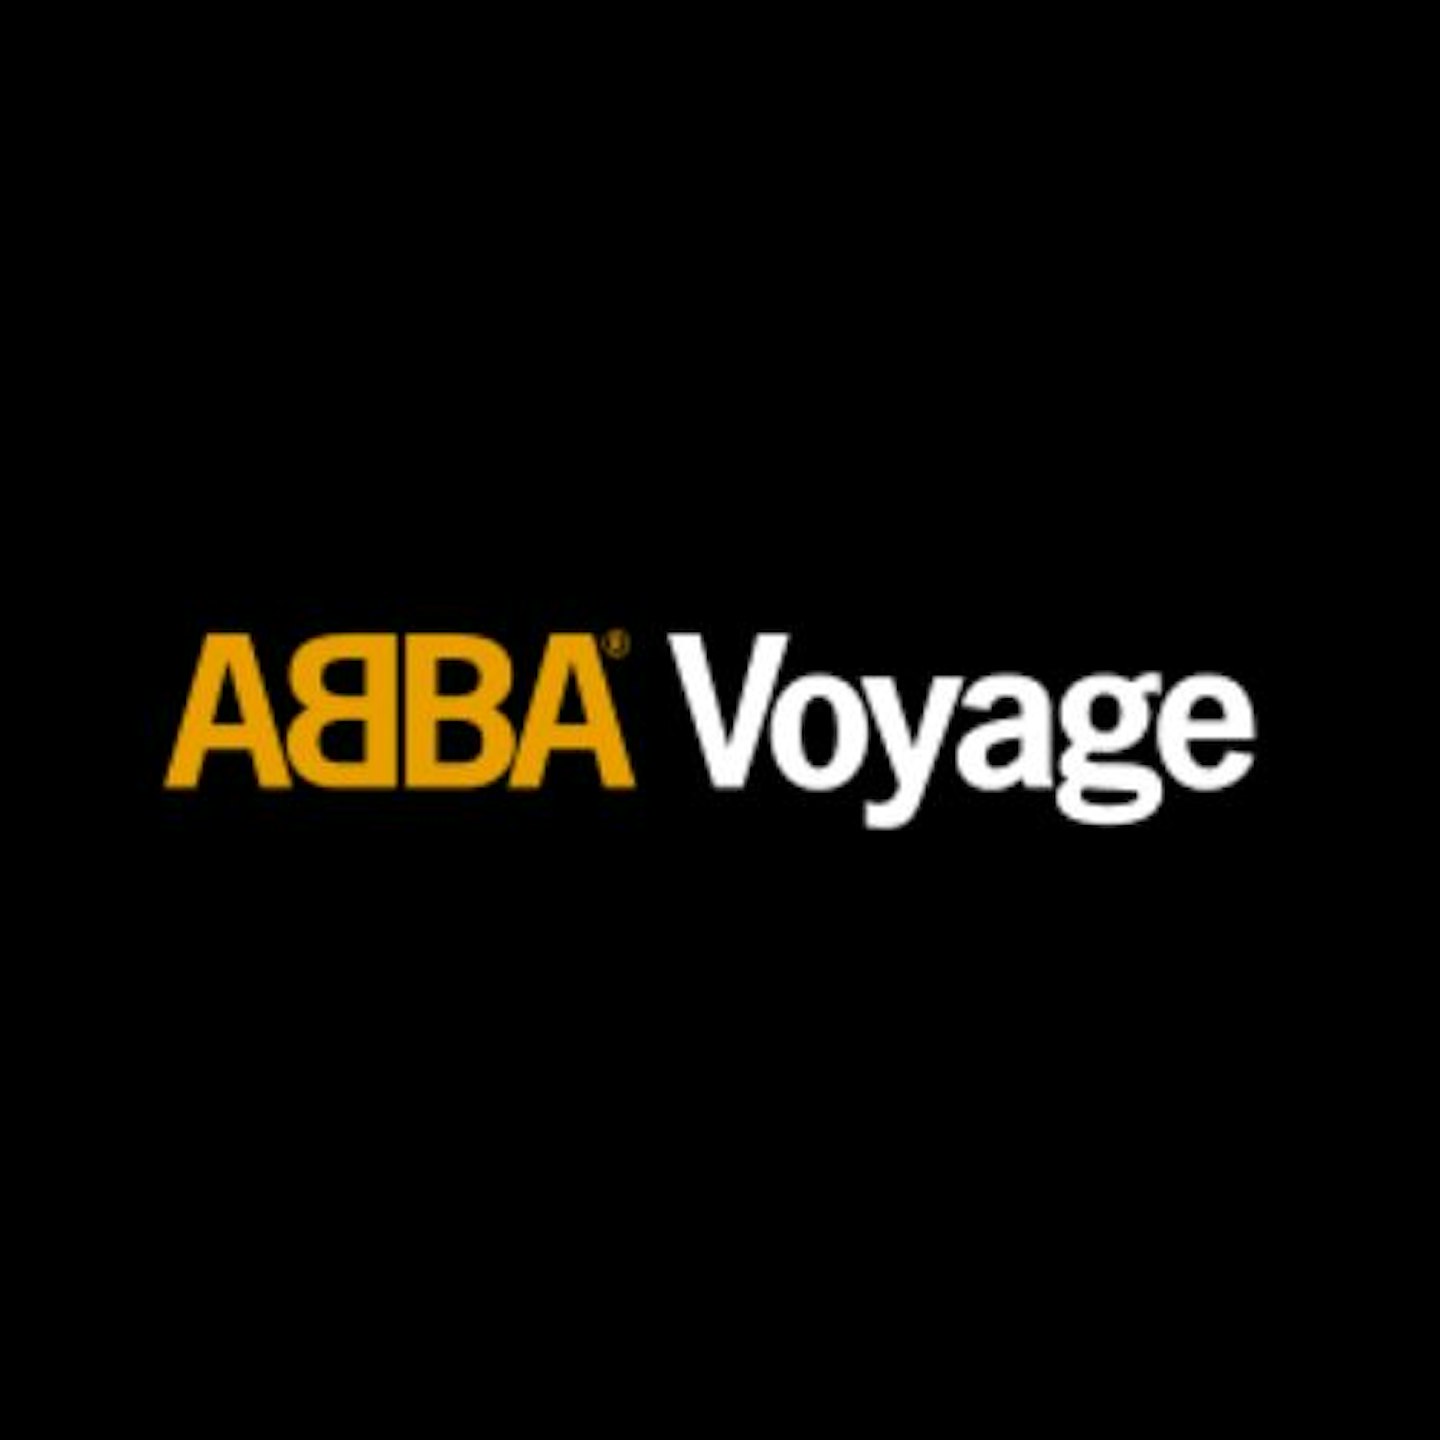 Tickets for ABBA Voyage